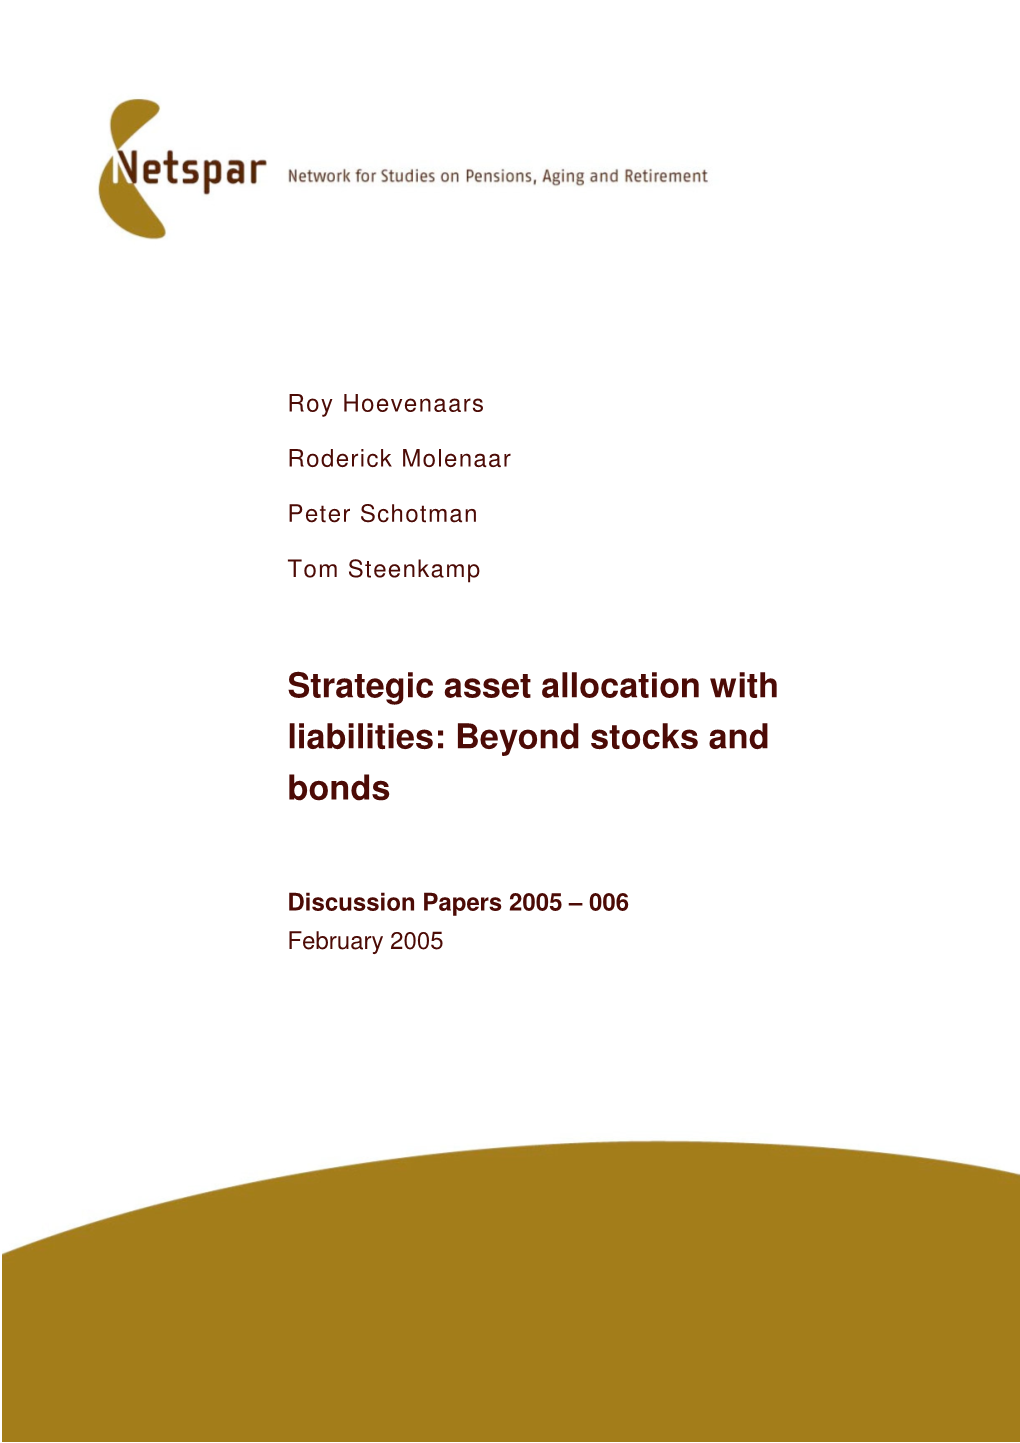 Strategic Asset Allocation with Liabilities: Beyond Stocks and Bonds